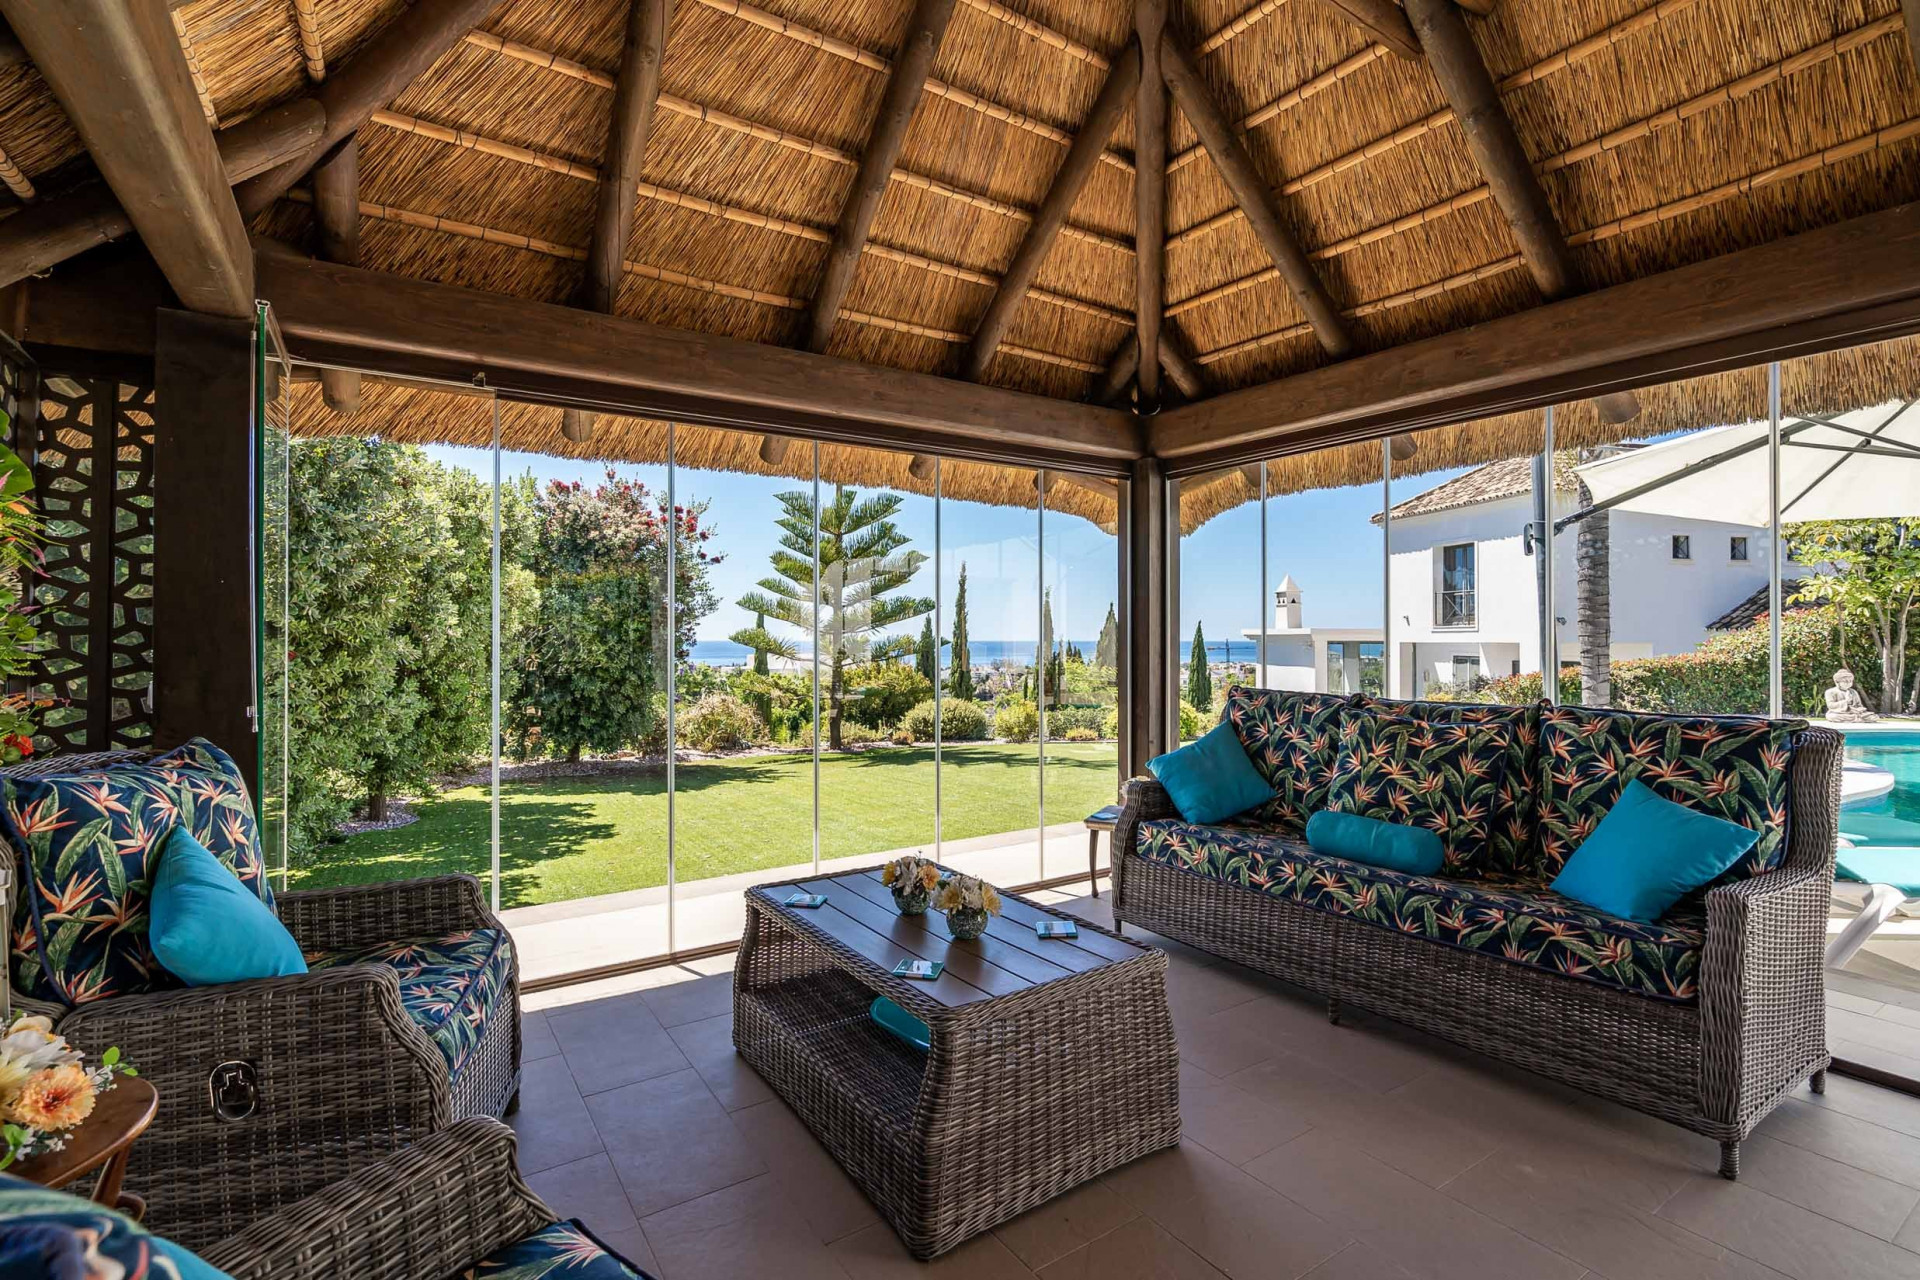 Beautiful villa in the best spot of Los Flamingos with amazing sea views